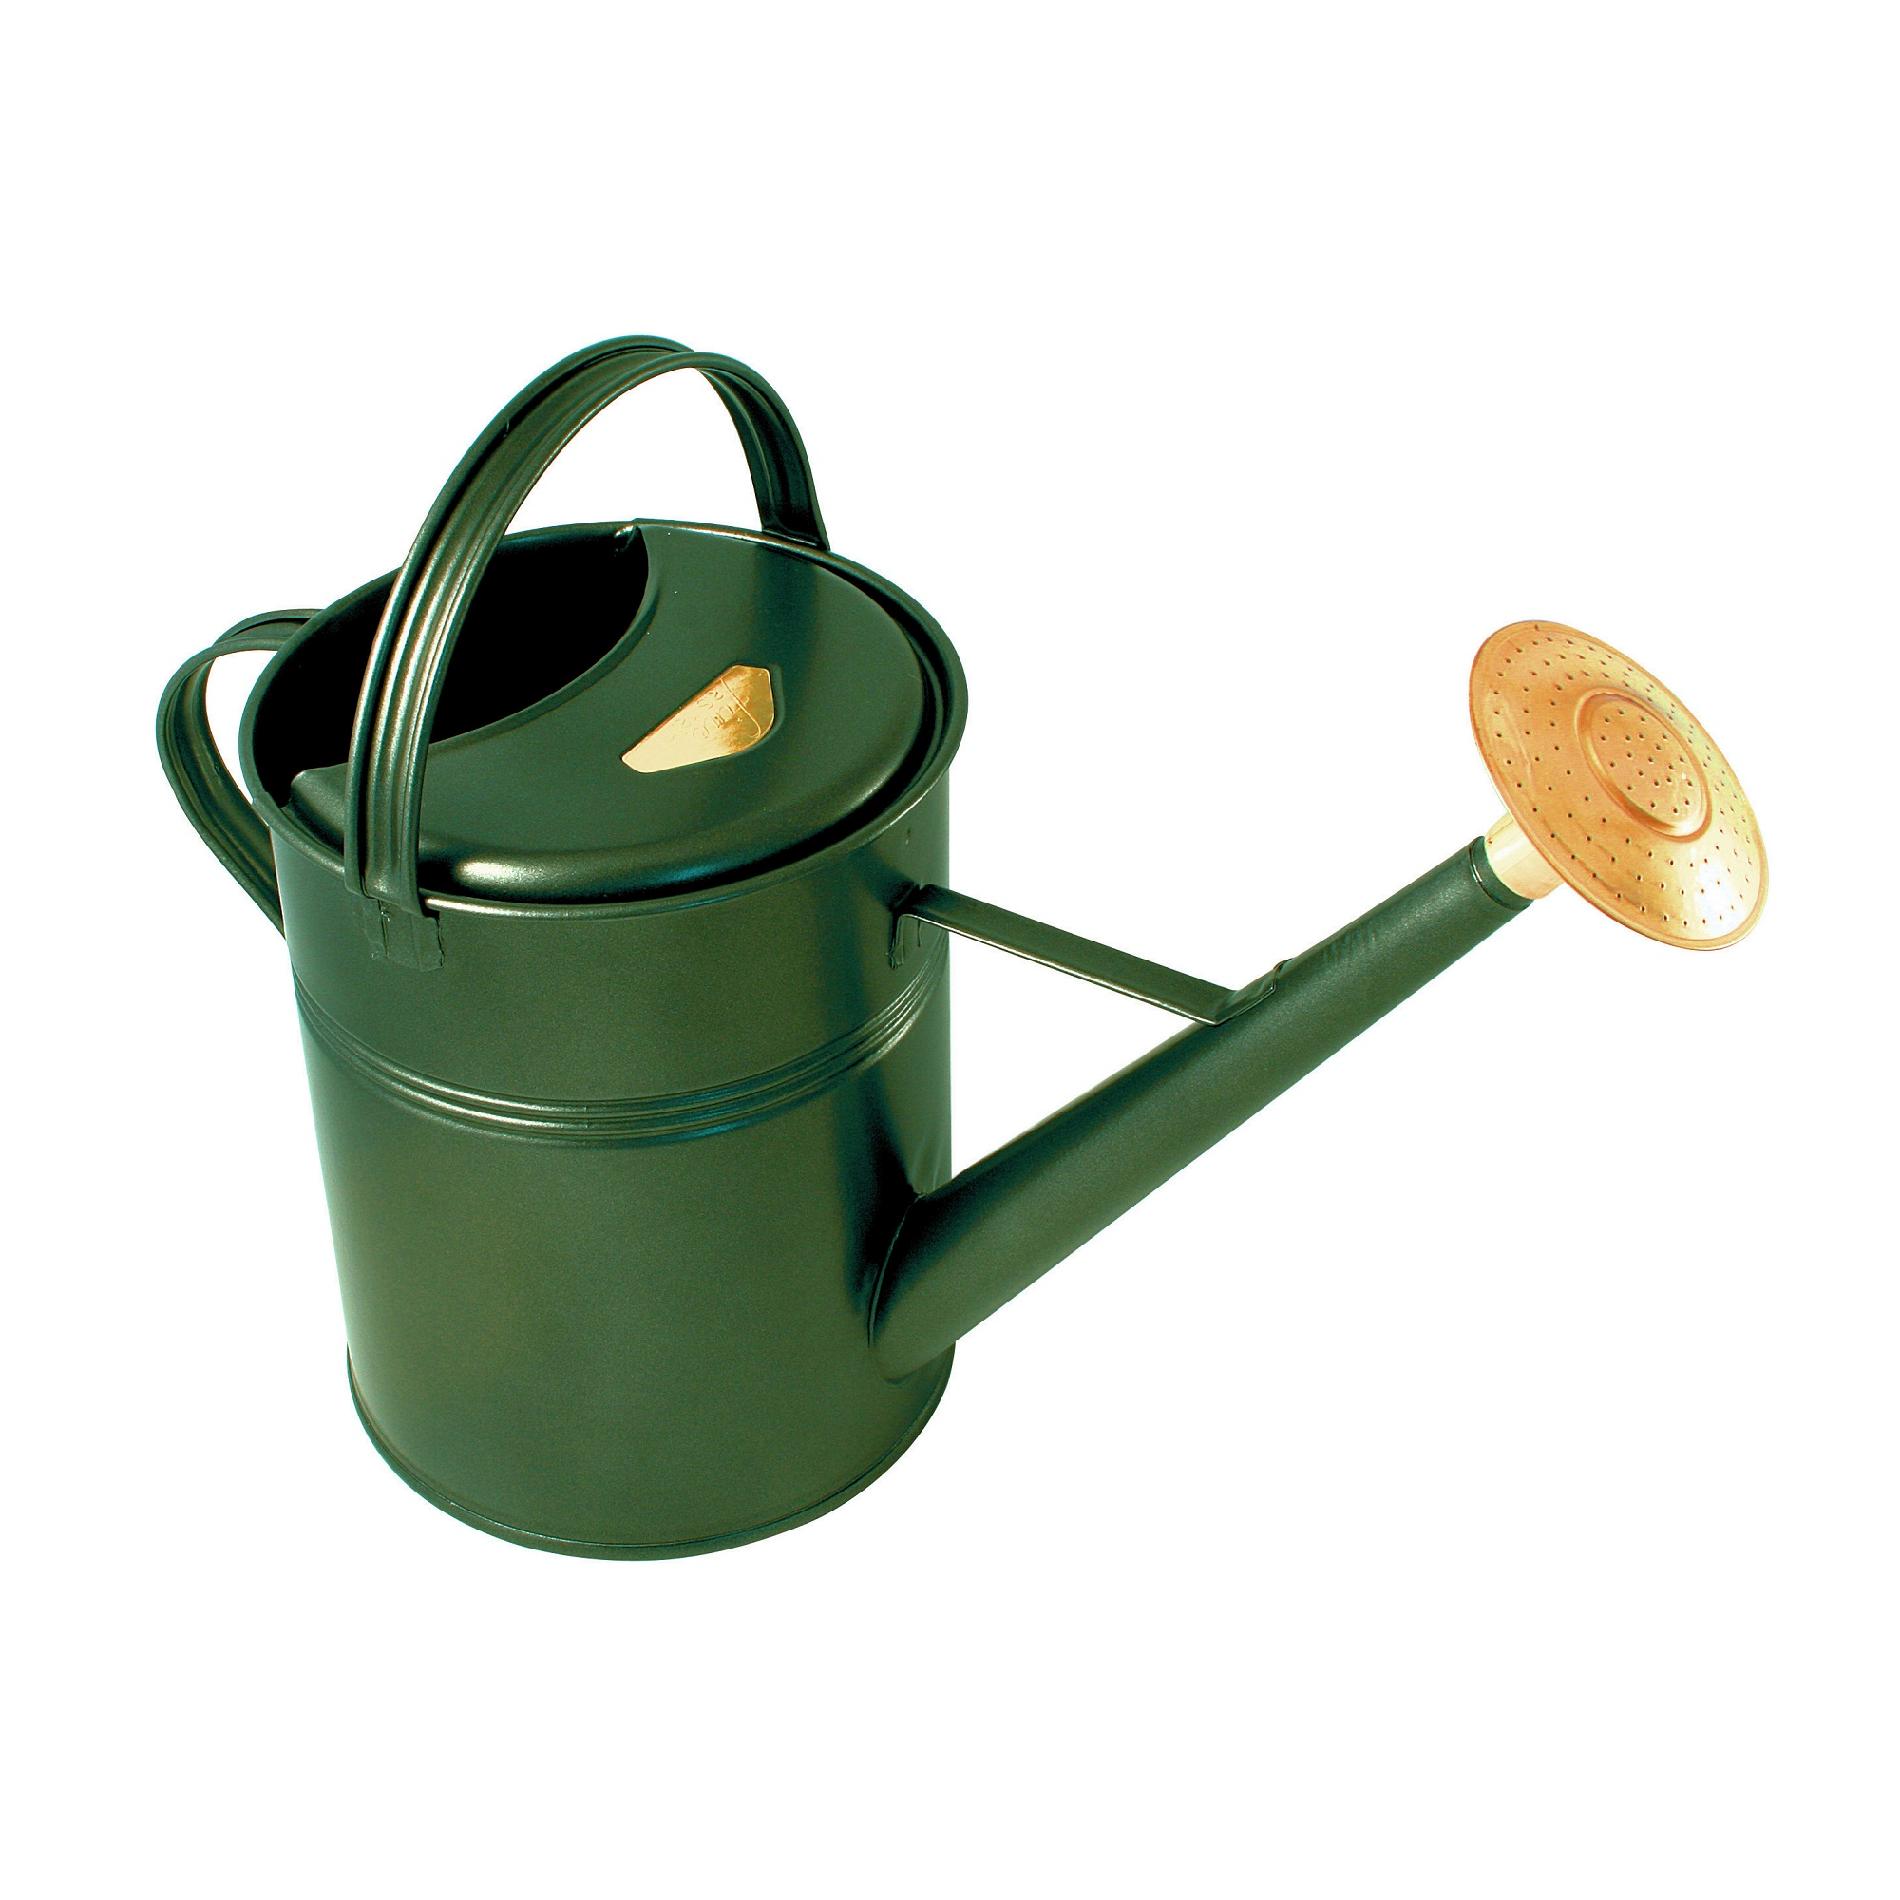 2.3 gallon Green Traditional Watering Can